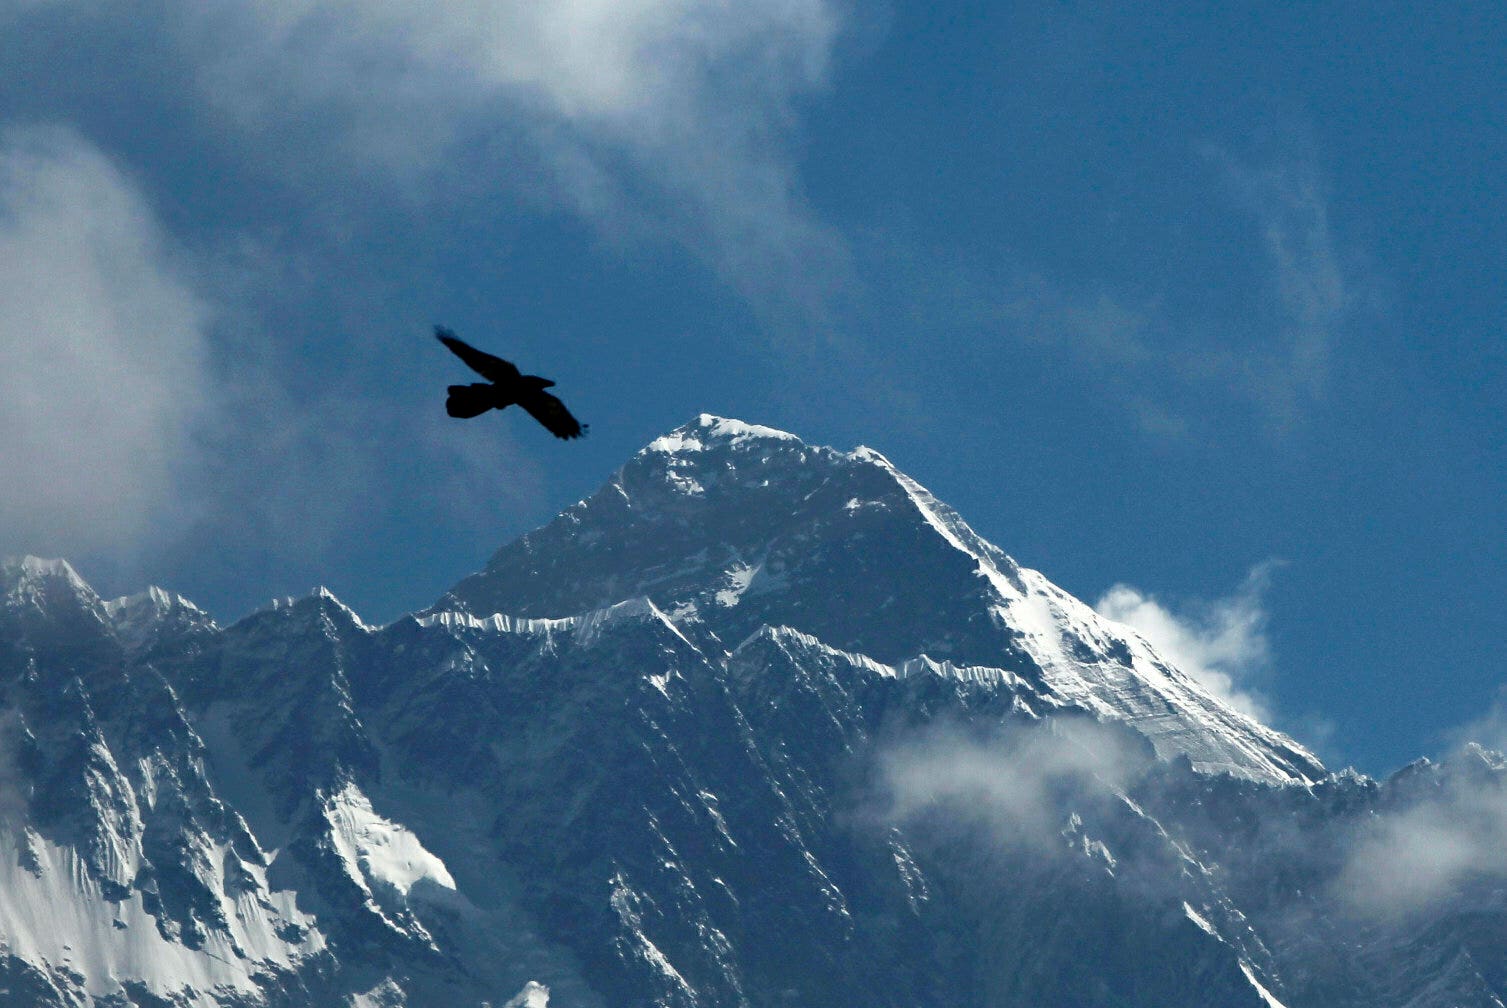 Nepal expects hundreds of climbers despite pandemic